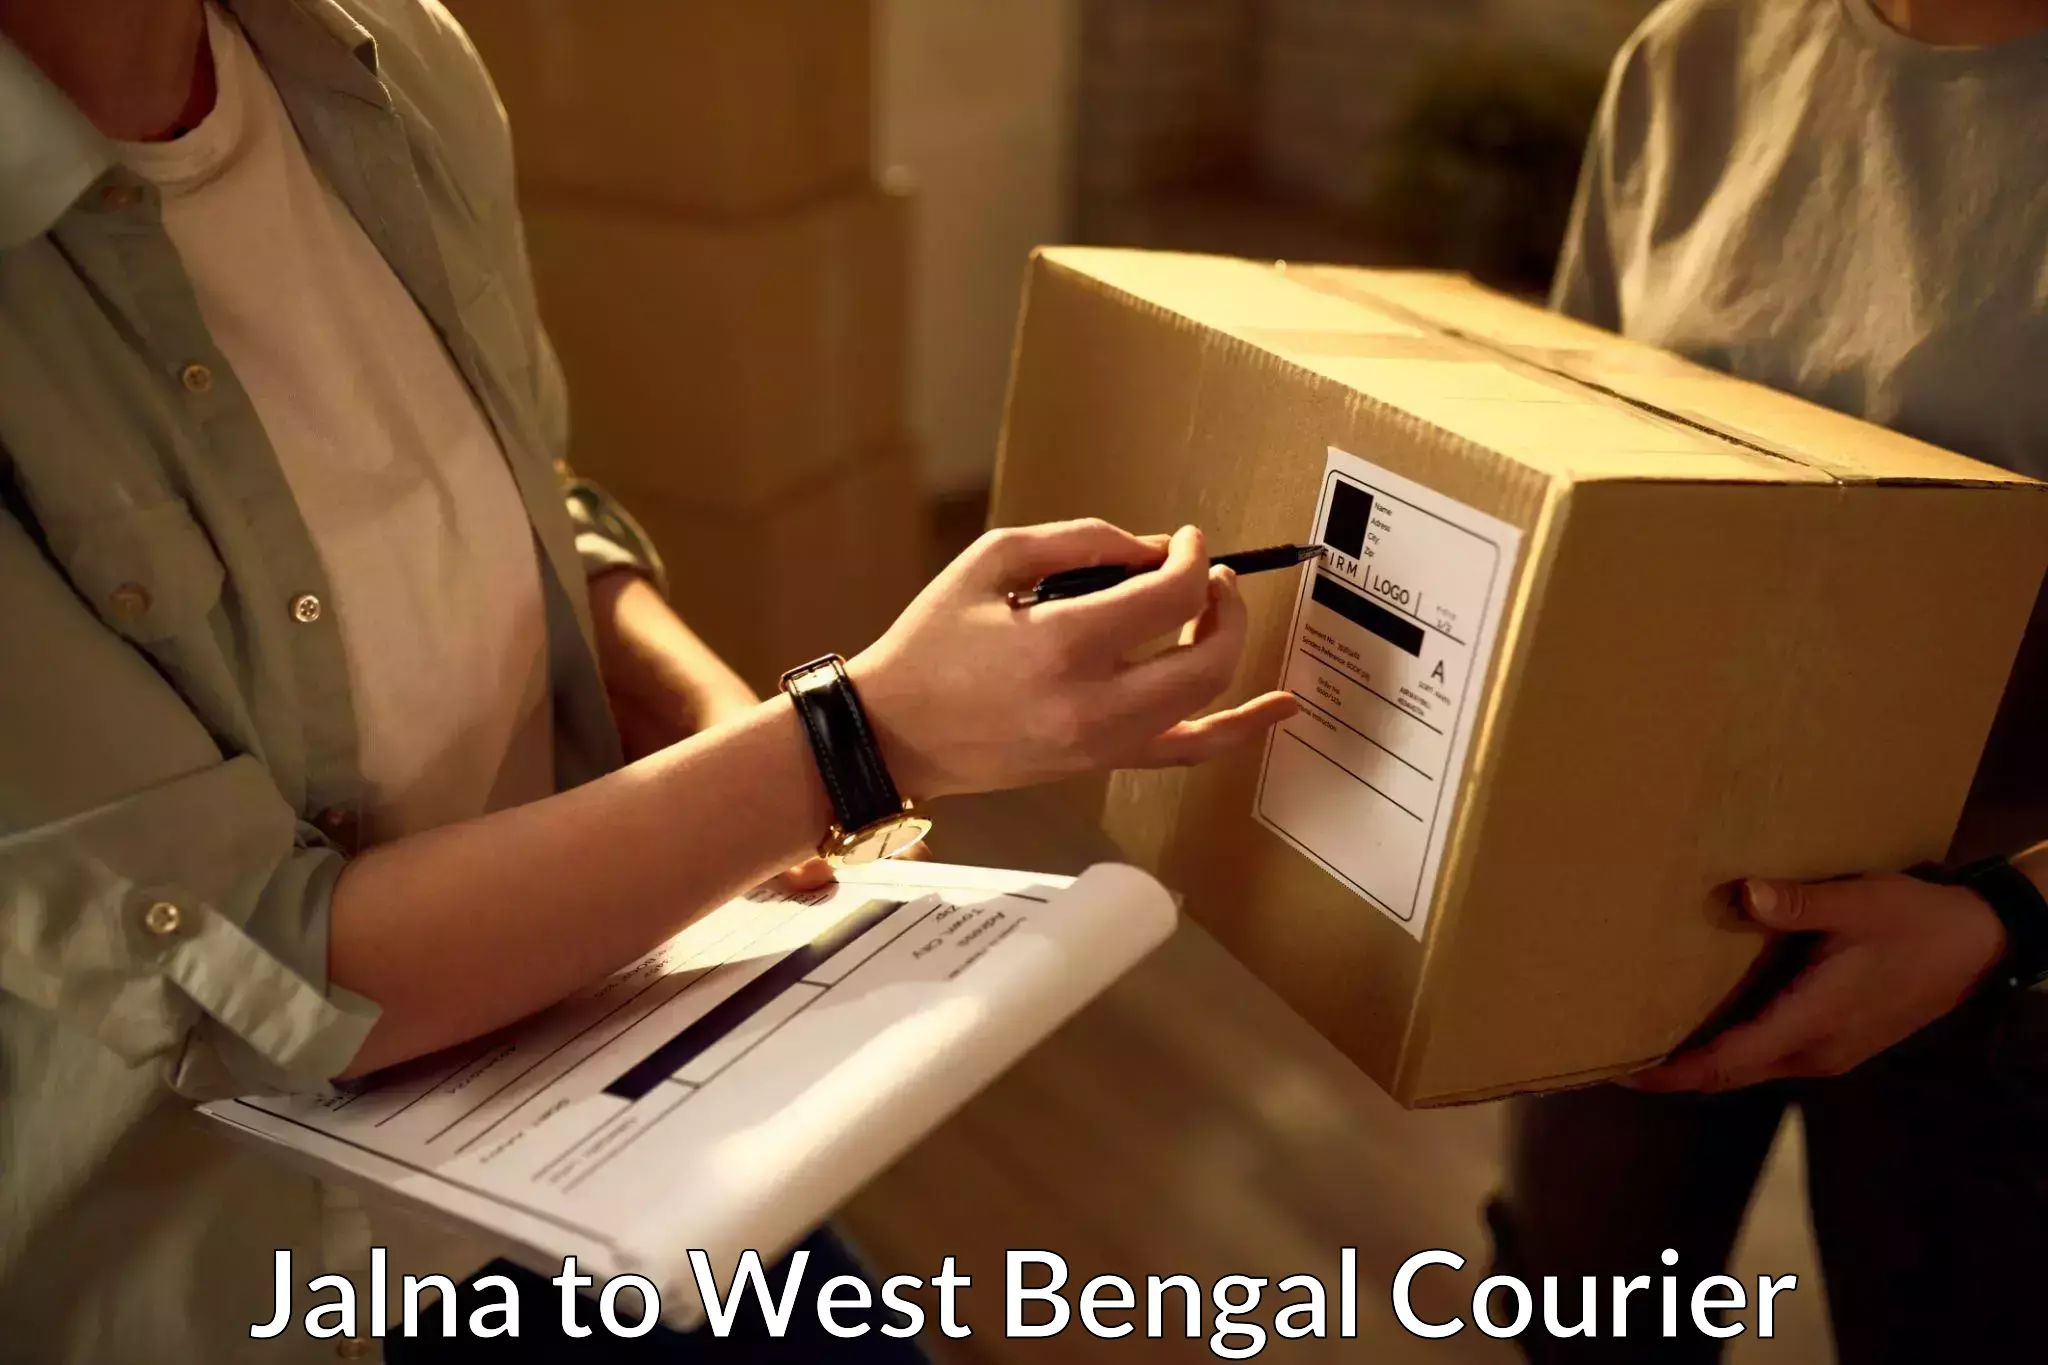 Bulk courier orders in Jalna to West Bengal